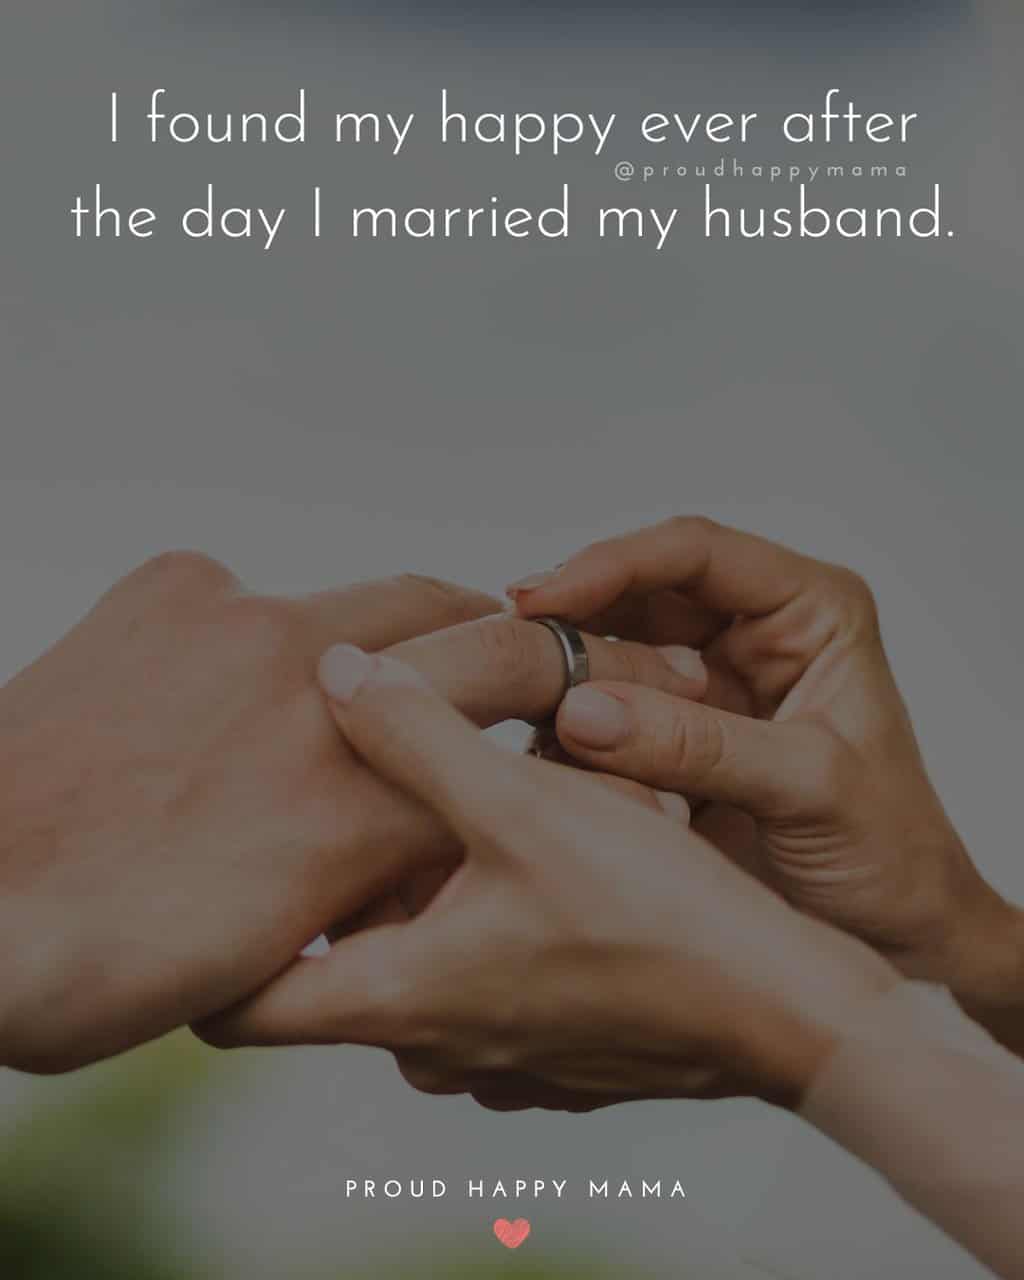 Woman placing wedding ring on husbands finger with husband love quote text overlay. ‘I found my happy ever after the day I married my husband.’